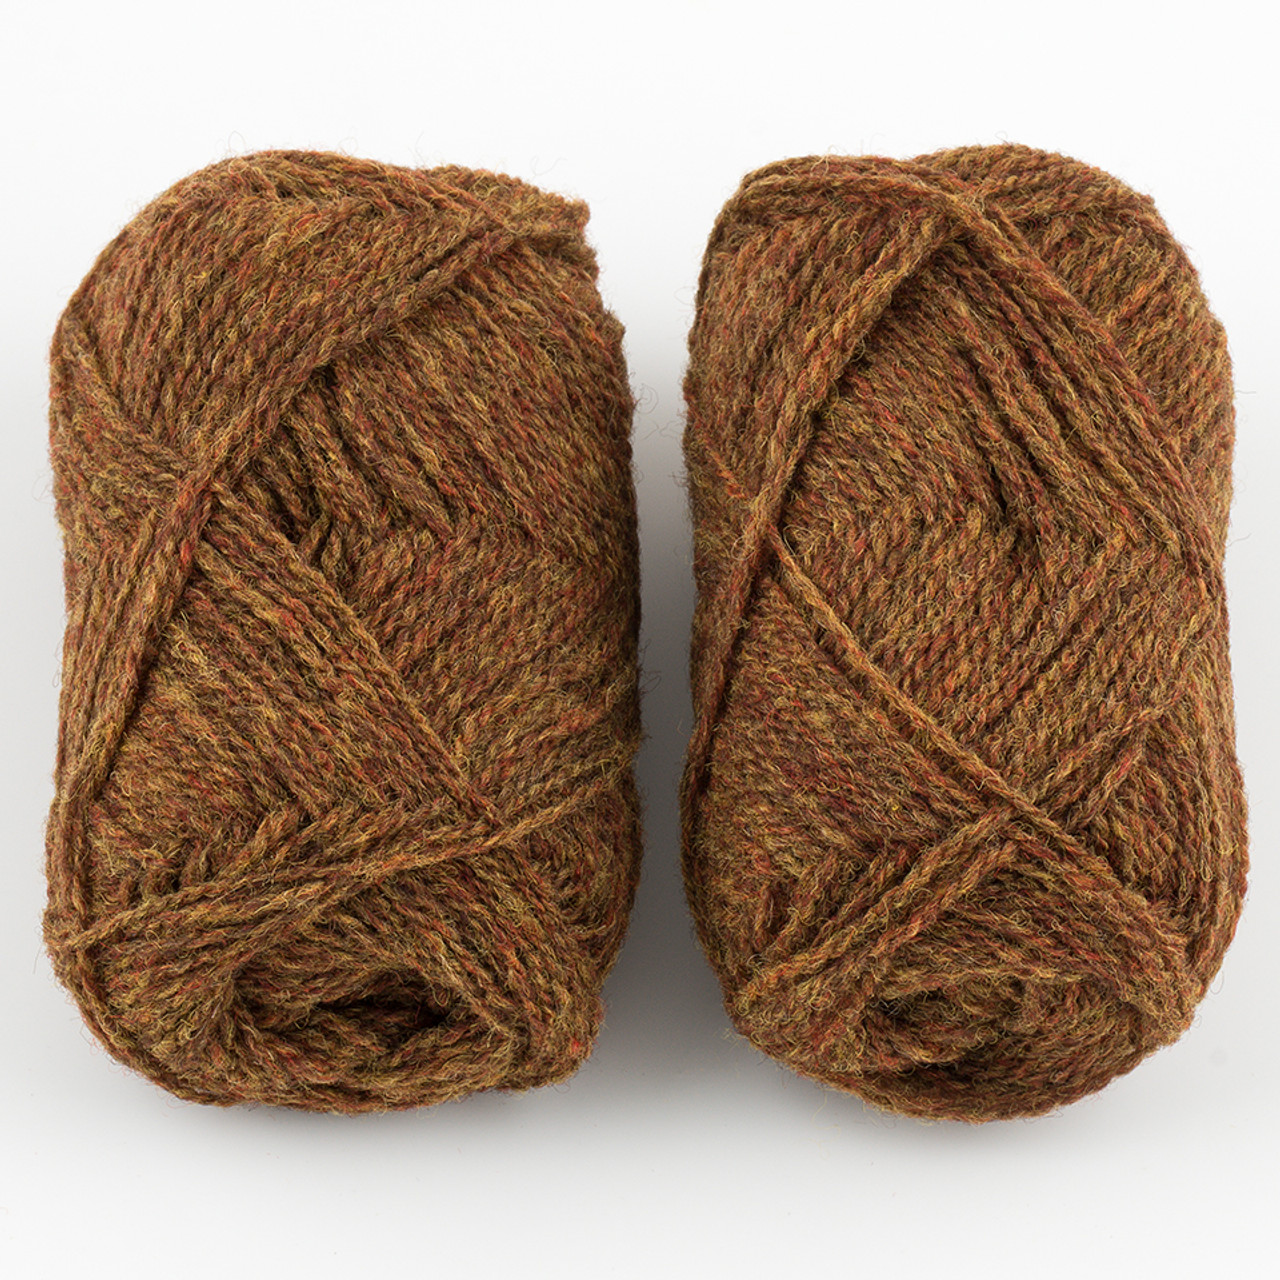 Hotellet hende Ristede Jamieson & Smith, 2ply Jumper Weight // 122 Mix - The Loopy Ewe